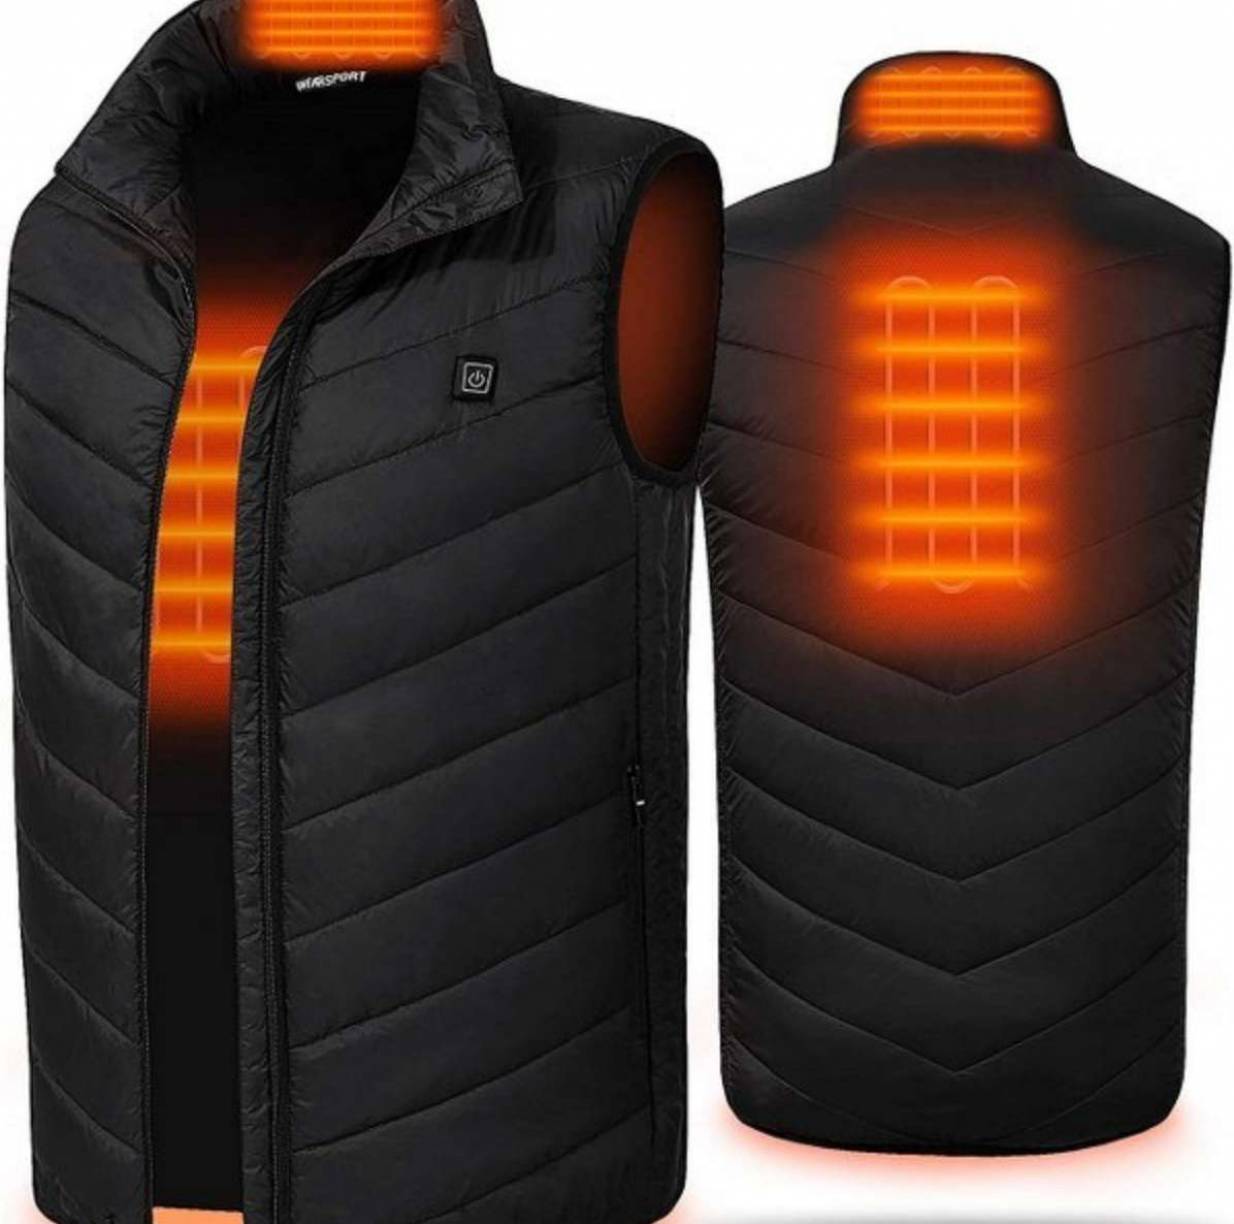 Do Heat Trapping Vest Work